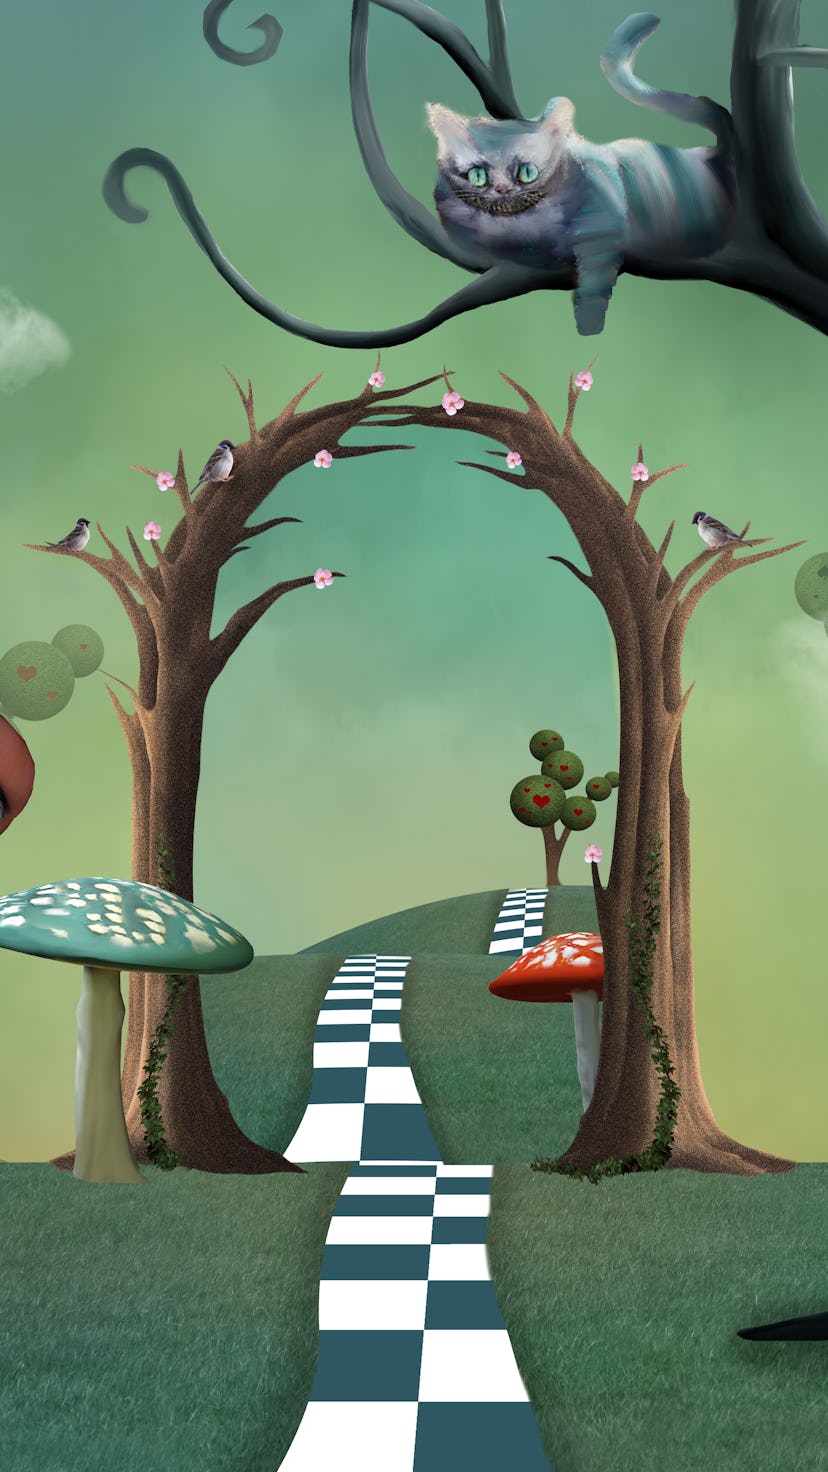 Wonderland surreal landscape with a magic passage and a cheshire cat watching the scene on a tree br...